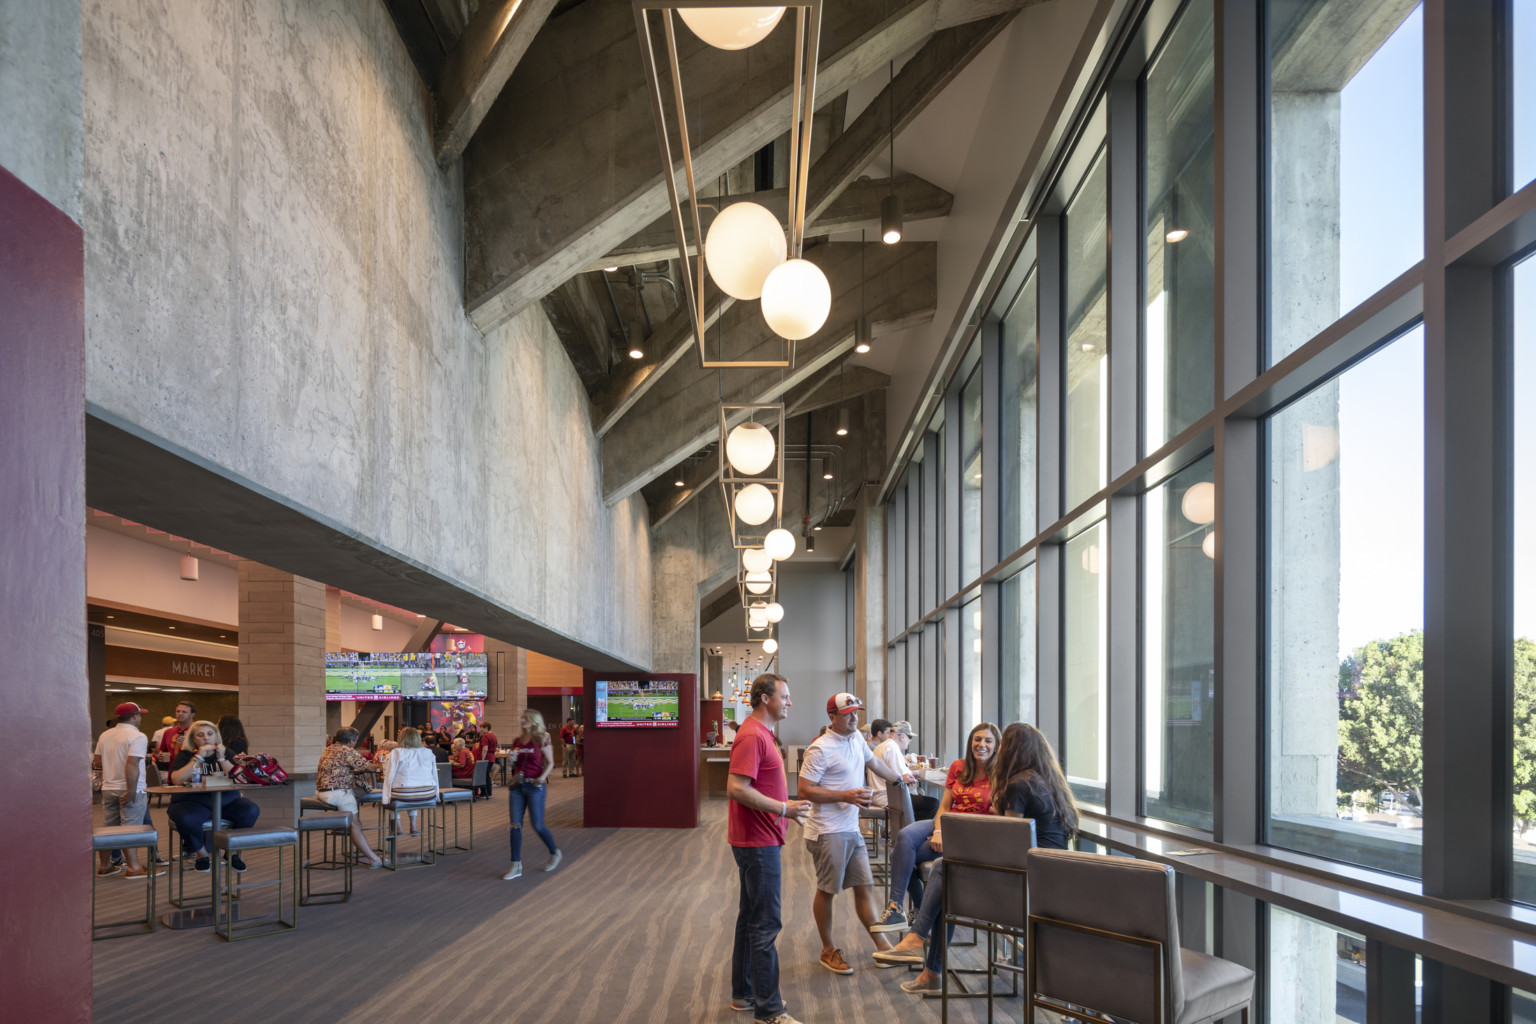 Raw concrete from stadium forms drop ceiling detail left of counter along floor to ceiling windows. Center, pendant lights